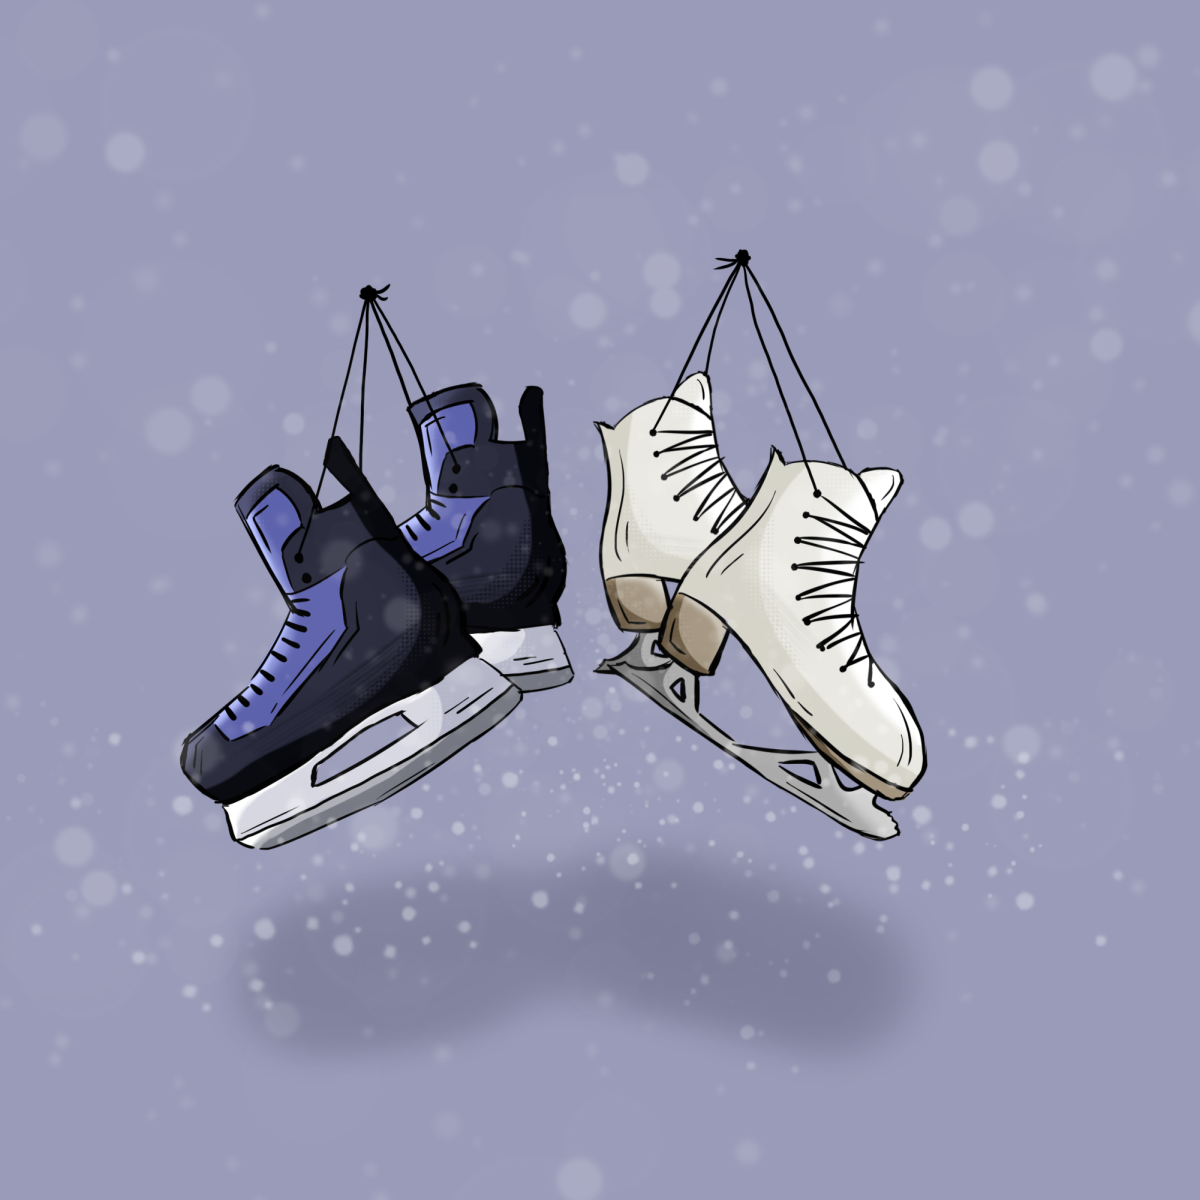 Skating into the season with winter sports